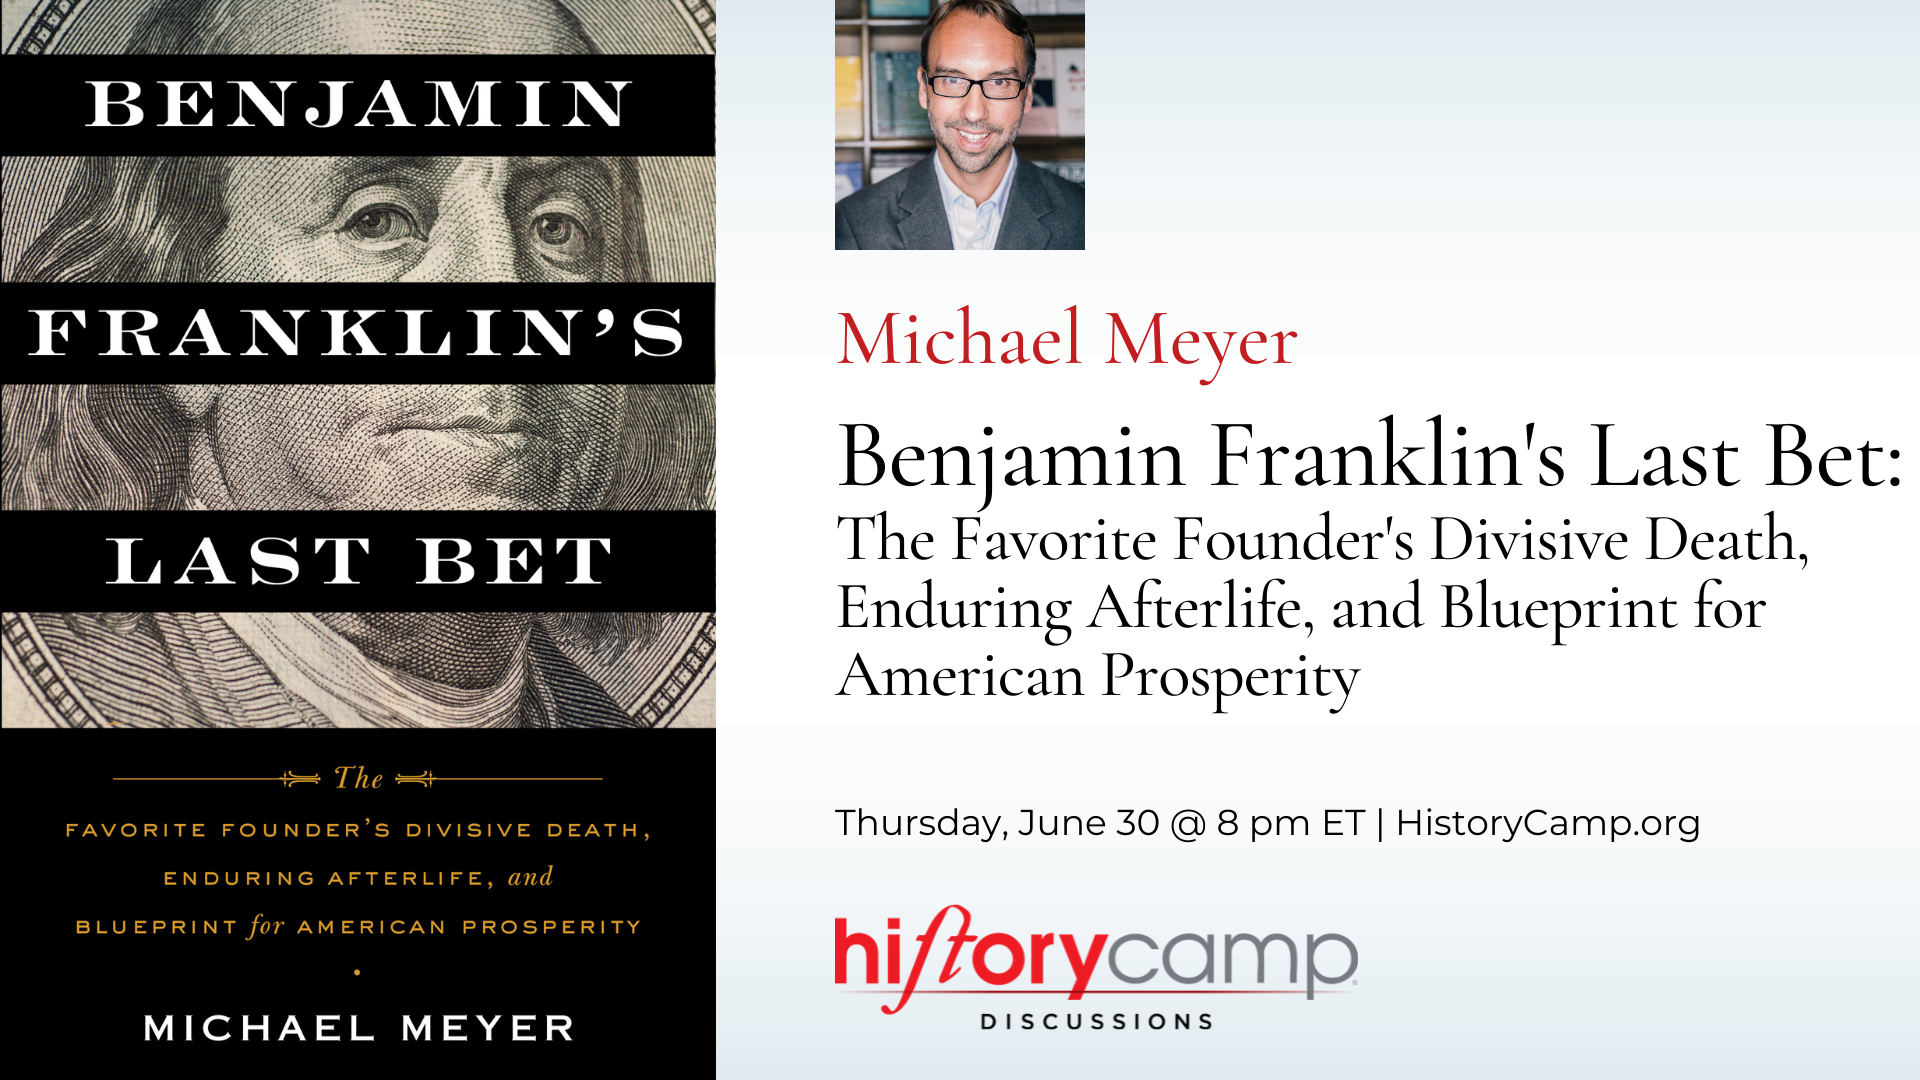 Michael Meyer—Benjamin Franklin's Last Bet: The Favorite Founder's Divisive Death, Enduring Afterlife, and Blueprint for American Prosperity